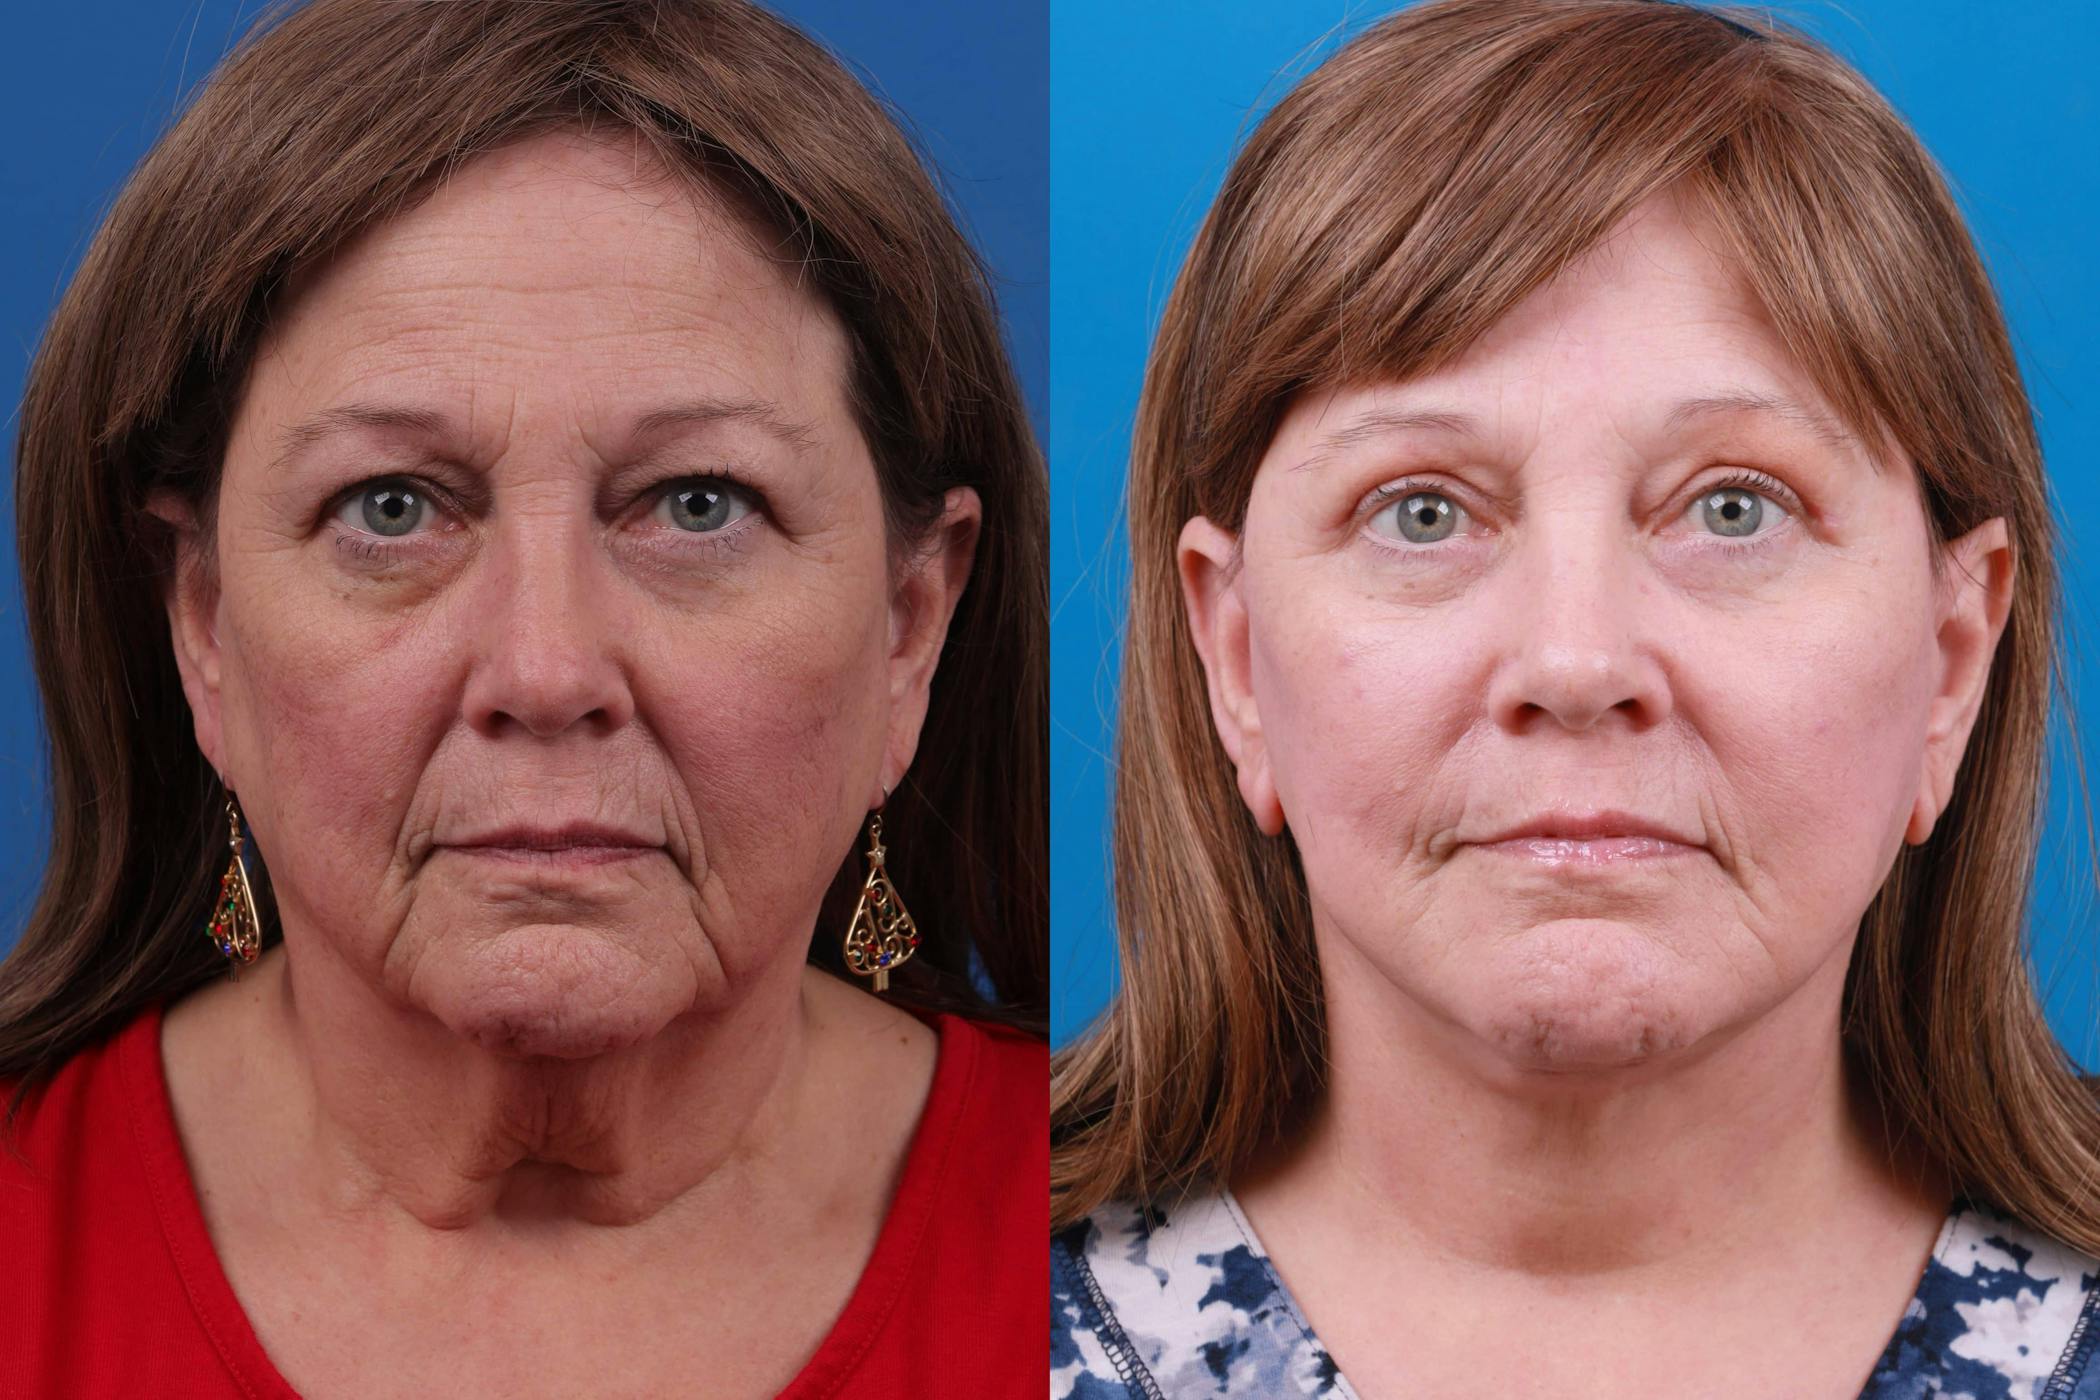 Before & after facelift surgery in Melbourne FL at Clevens Face and Body Specialists